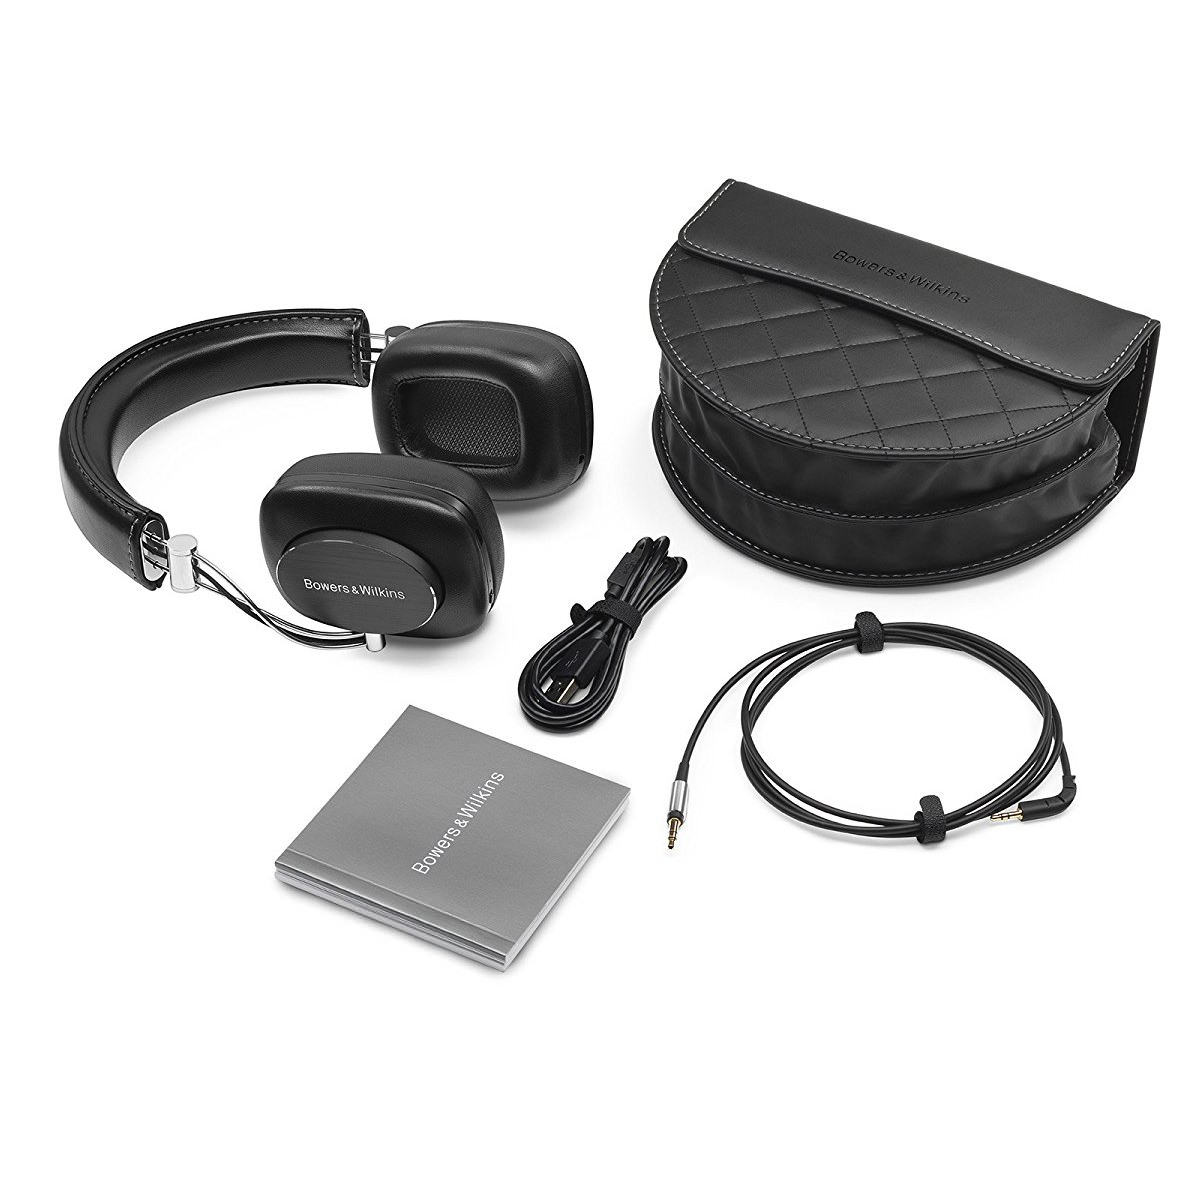 Bowers wilkins p7. Bowers p7 Wireless. Bowers and Wilkins p7 Wireless Headphones. Bowers Wilkins наушники беспроводные.